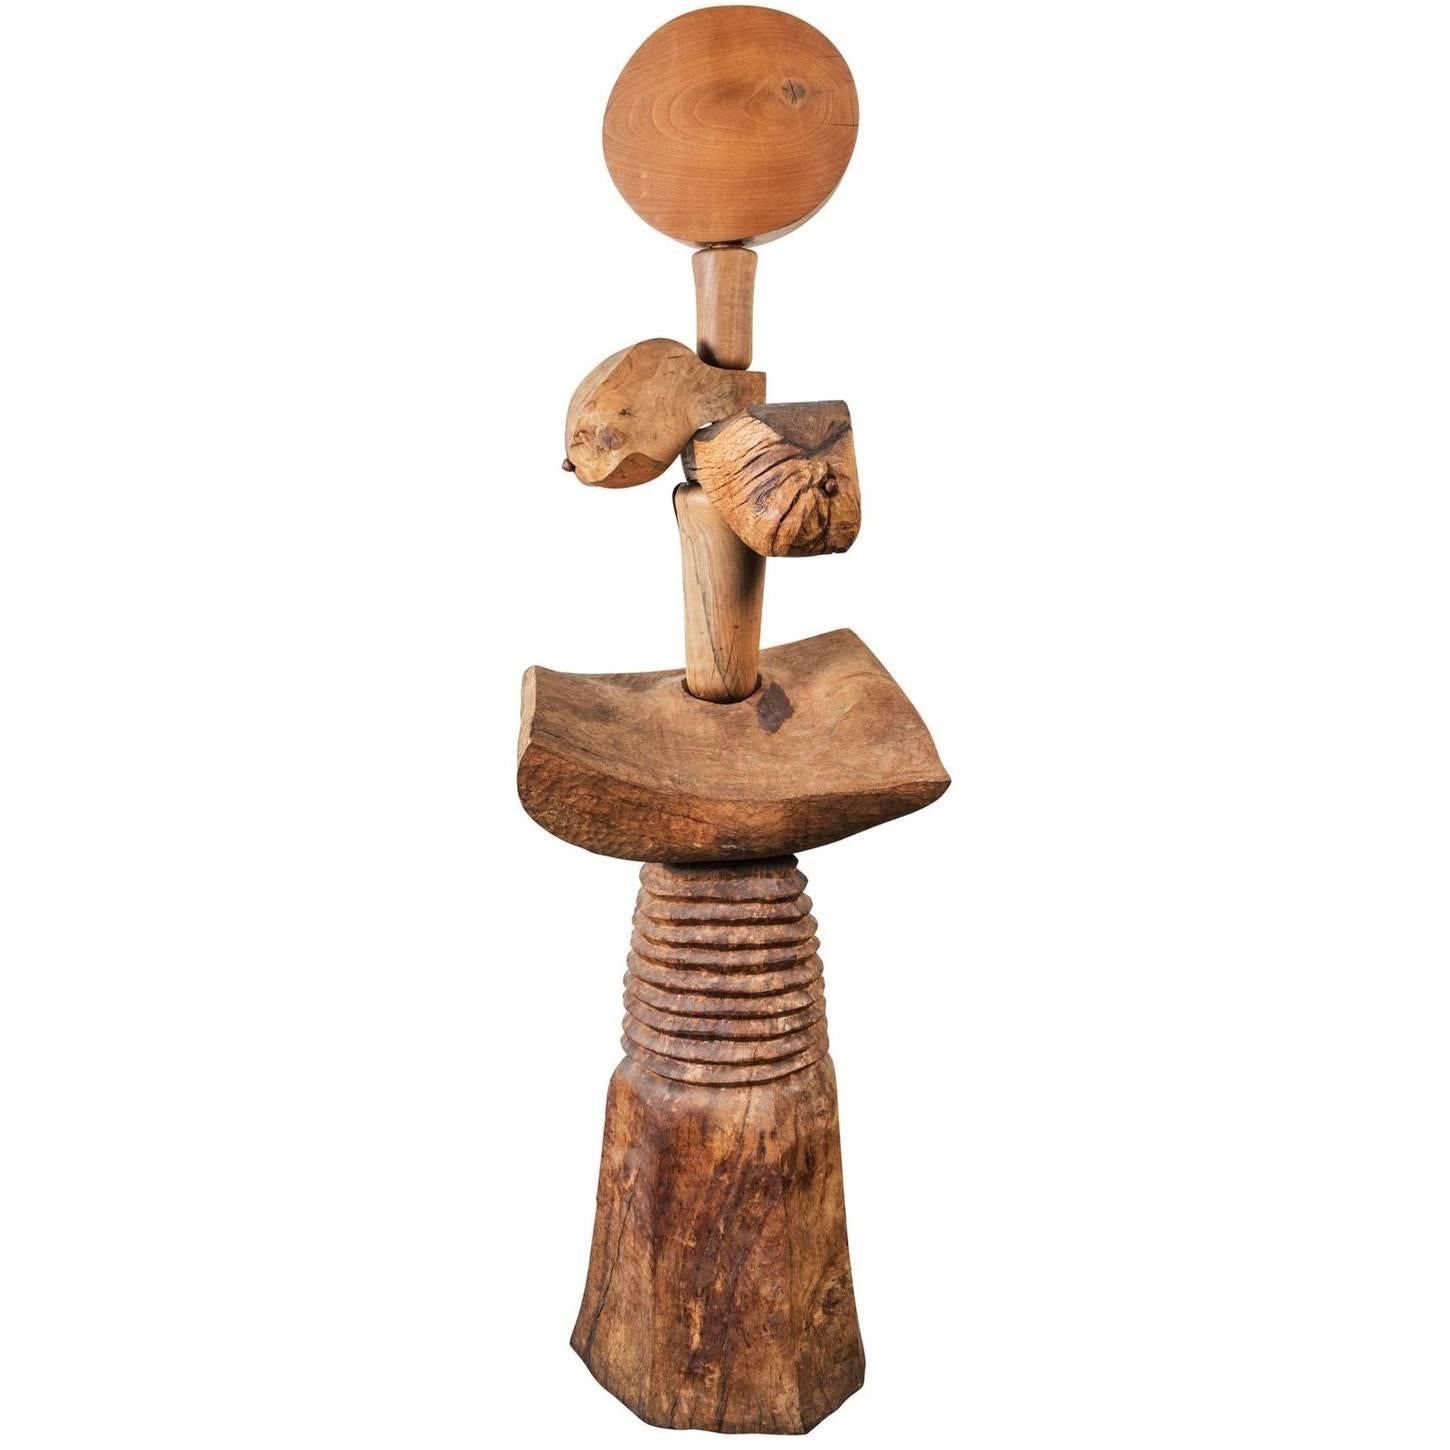 Remarkable, large, hand-carved, tribal-type, teak sculpture of an abstract, female form featuring a mix of refined and rough finishes.